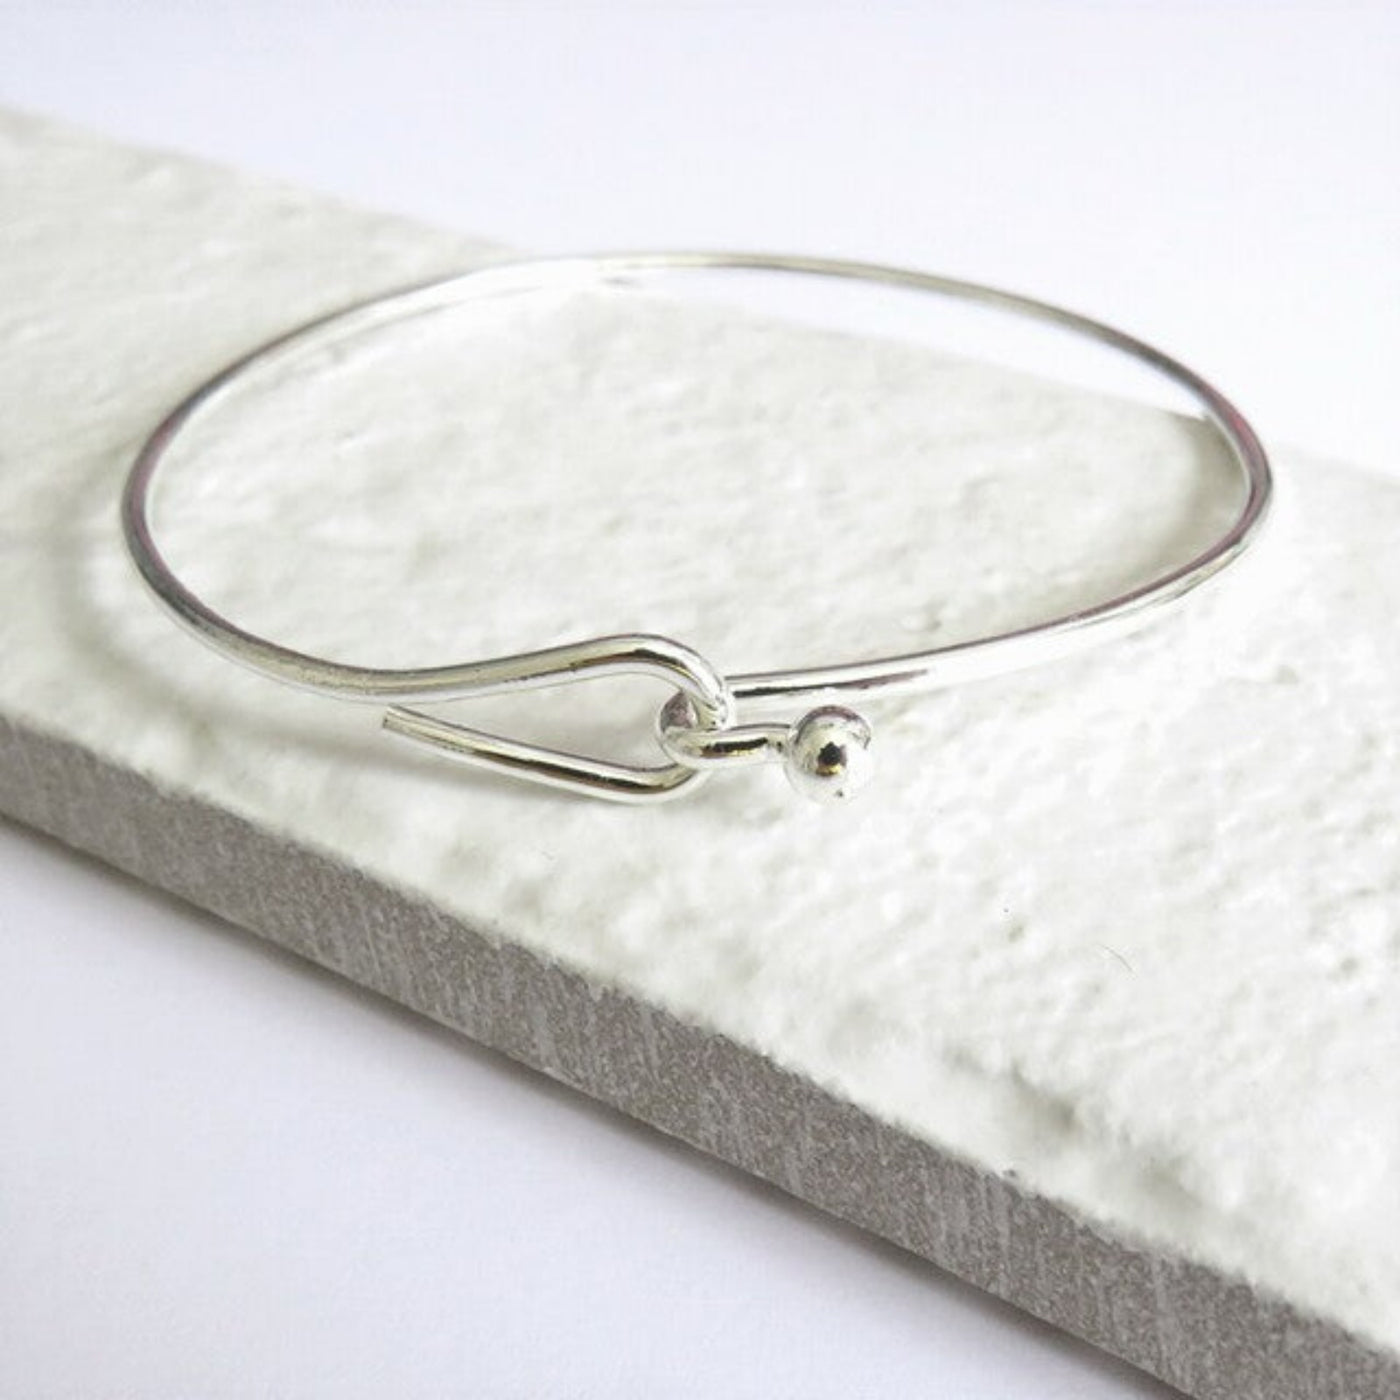 Women's Silver Plated Hoop Cuff Bangle In Gift Box.